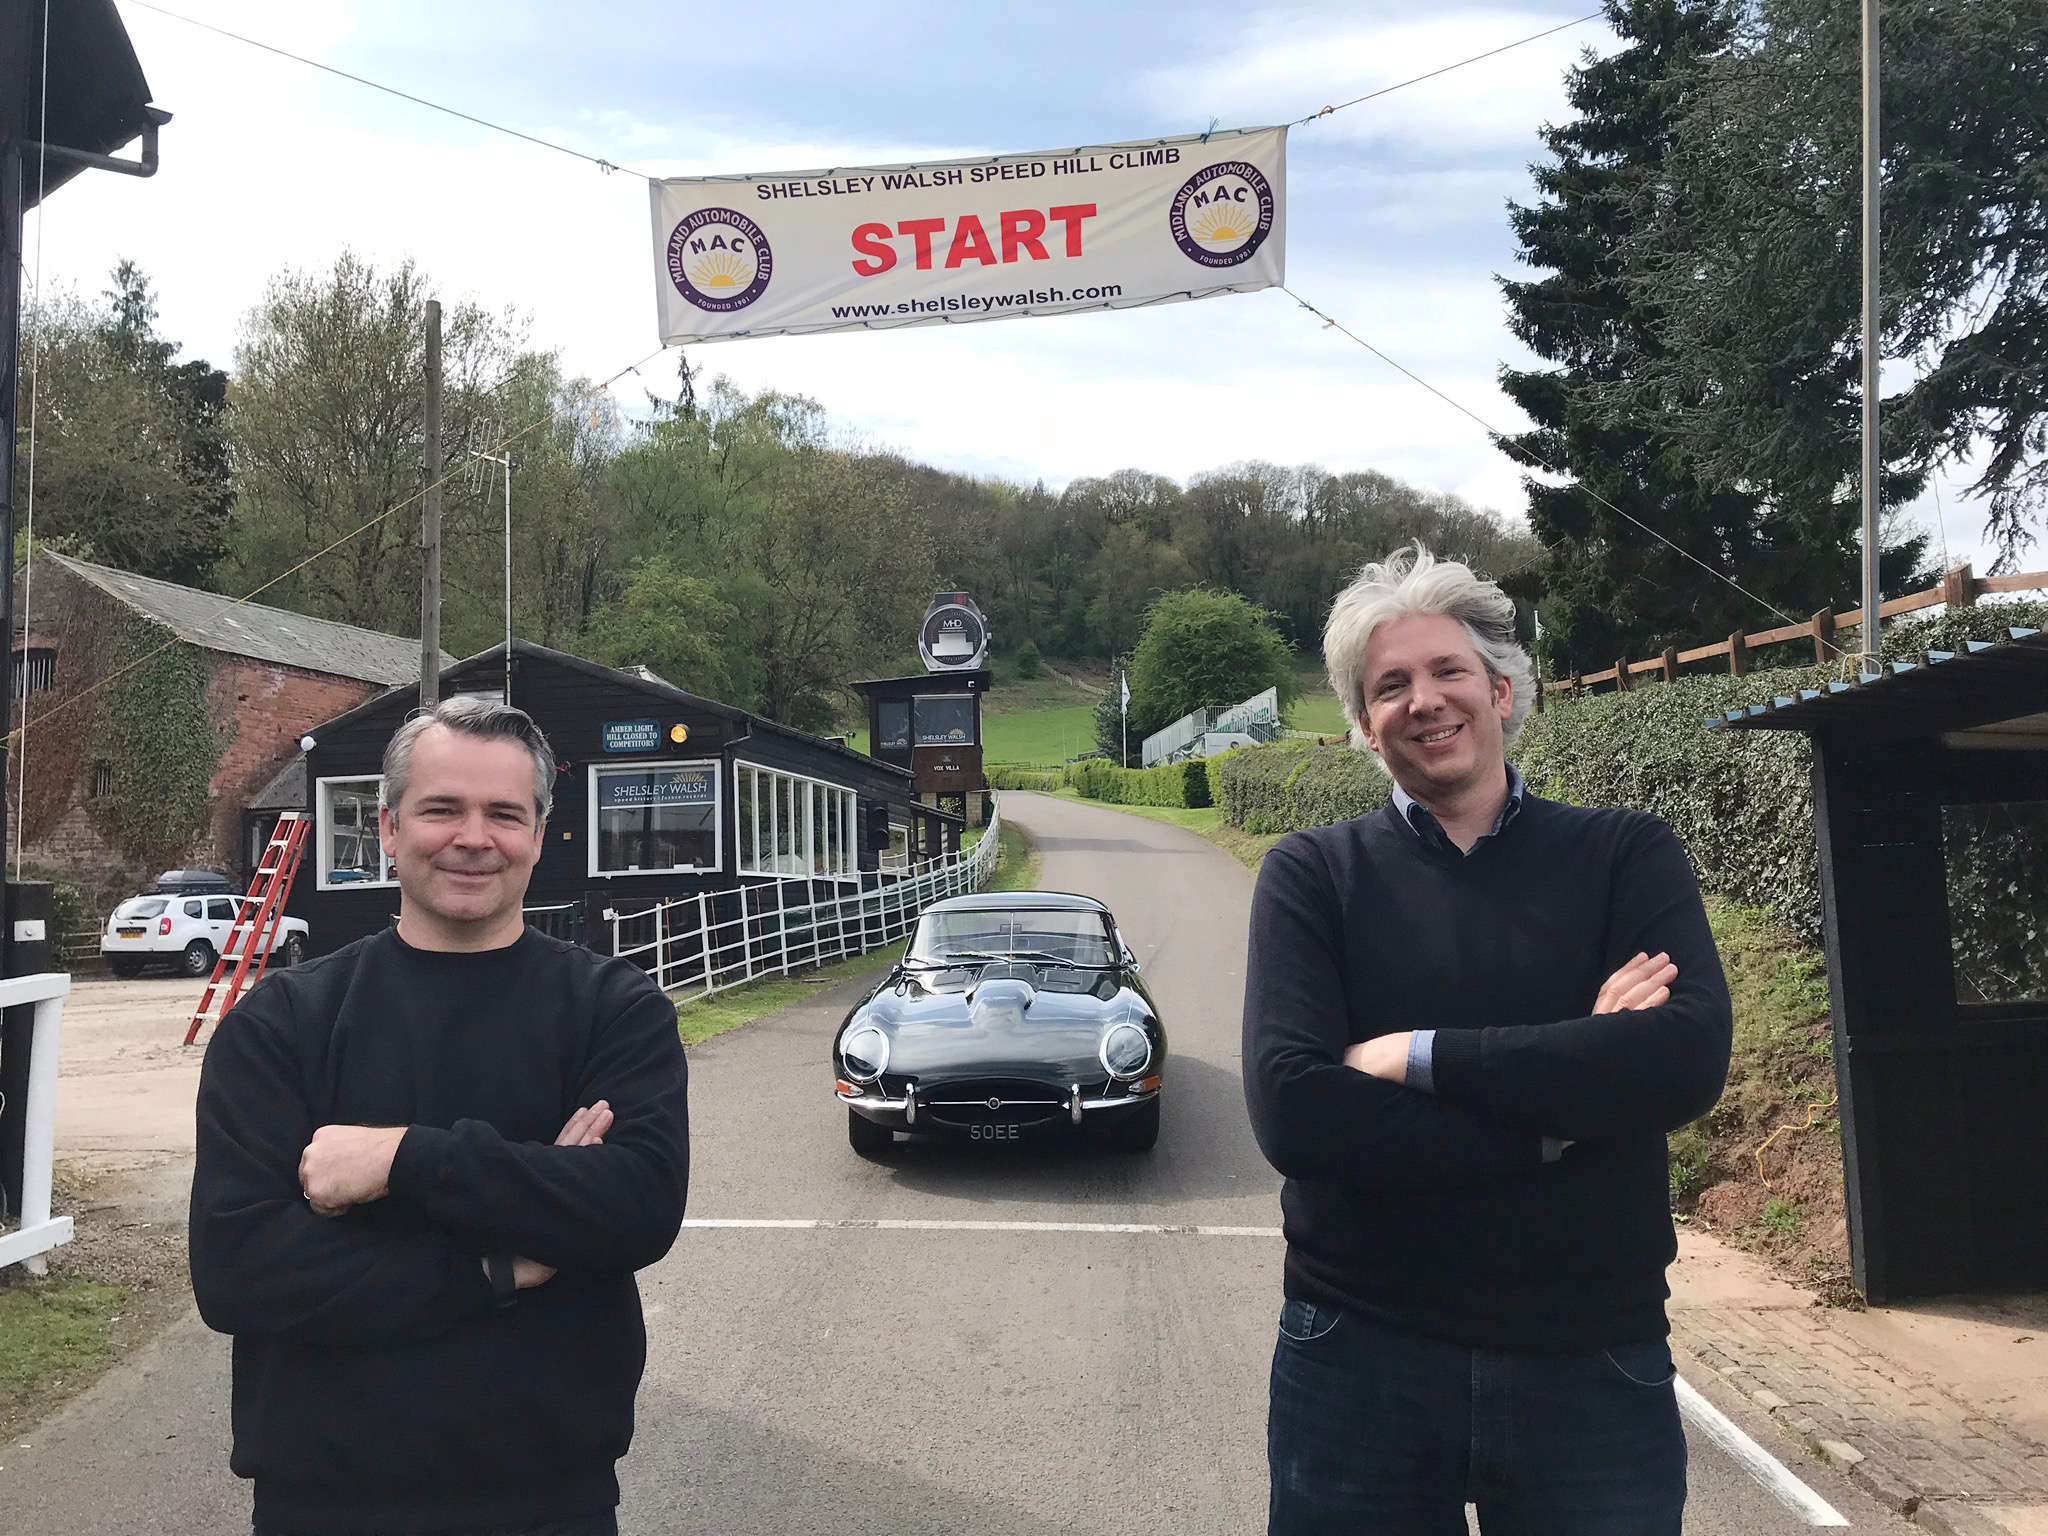 Edd China, Edd China reveals yet another comeback project, ClassicCars.com Journal